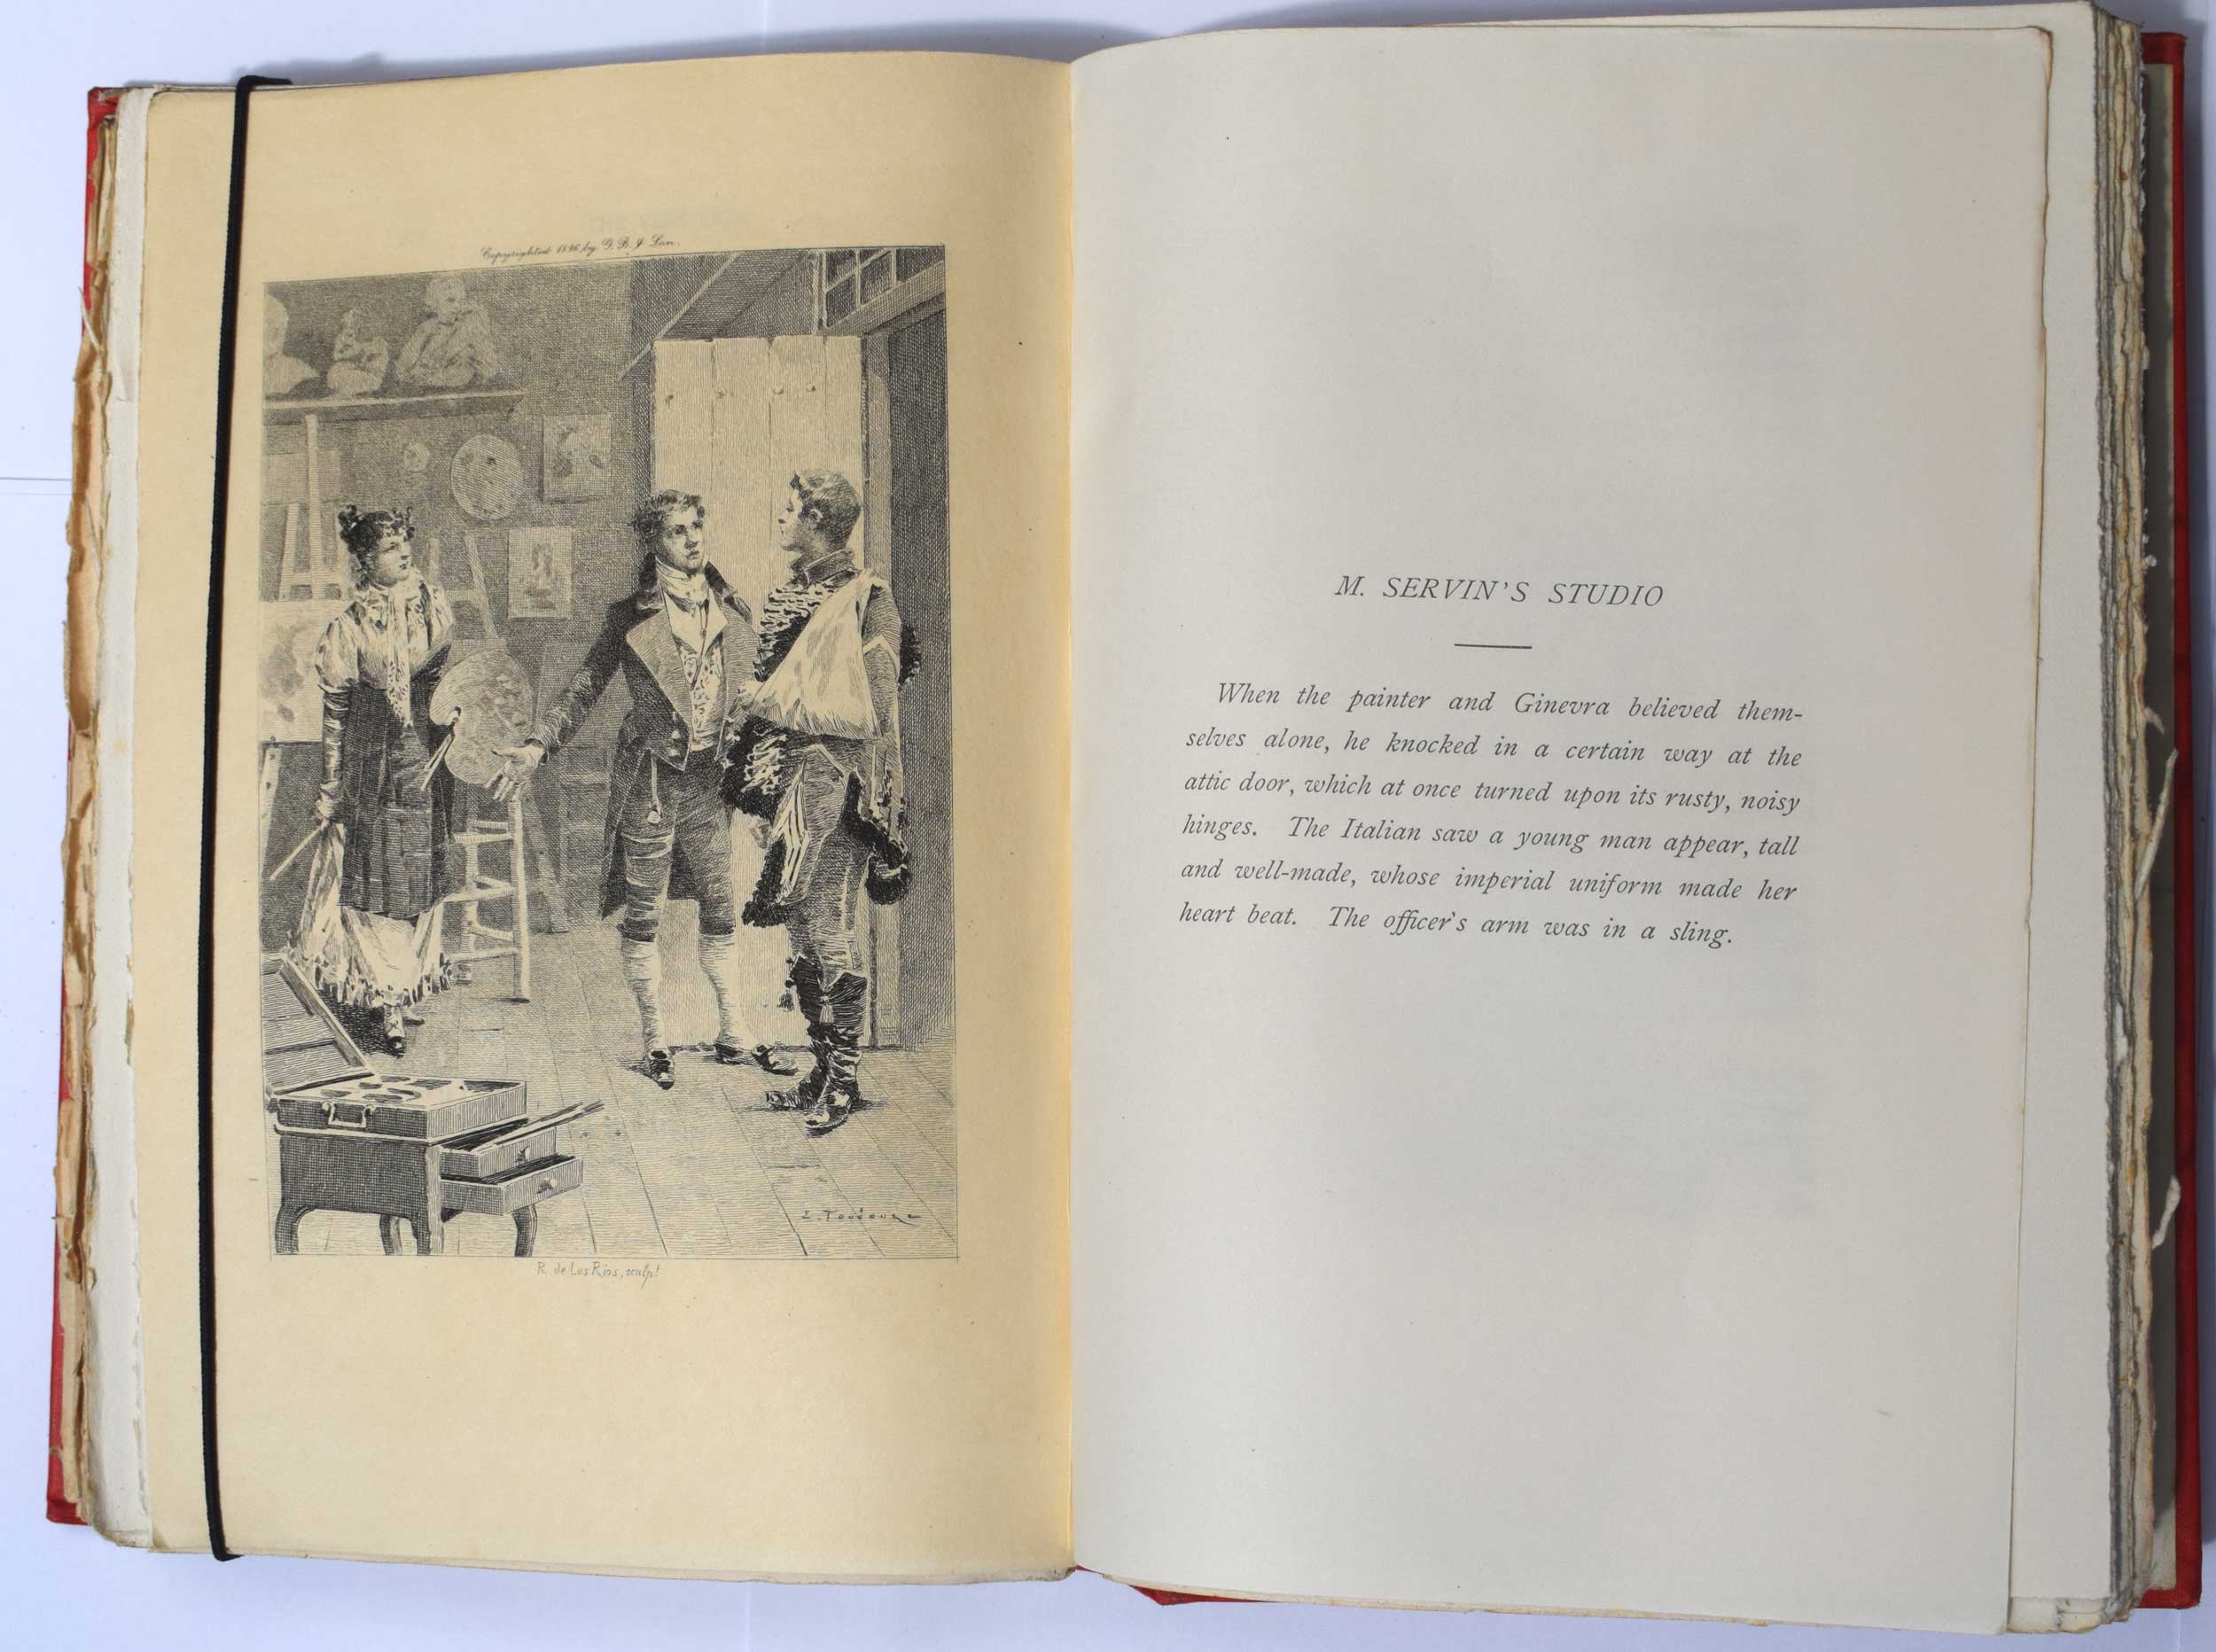 La Comedie Humaine. Scenes of Parisian Life. Scenes of Private Life. Etchings by Gery-Bichard, Eugene Gaujean and R de Los Rios, after paintings by Georges Cain and Louis-Edouard Fournier (amongst others). 22 volume set. [The Human Comedy]